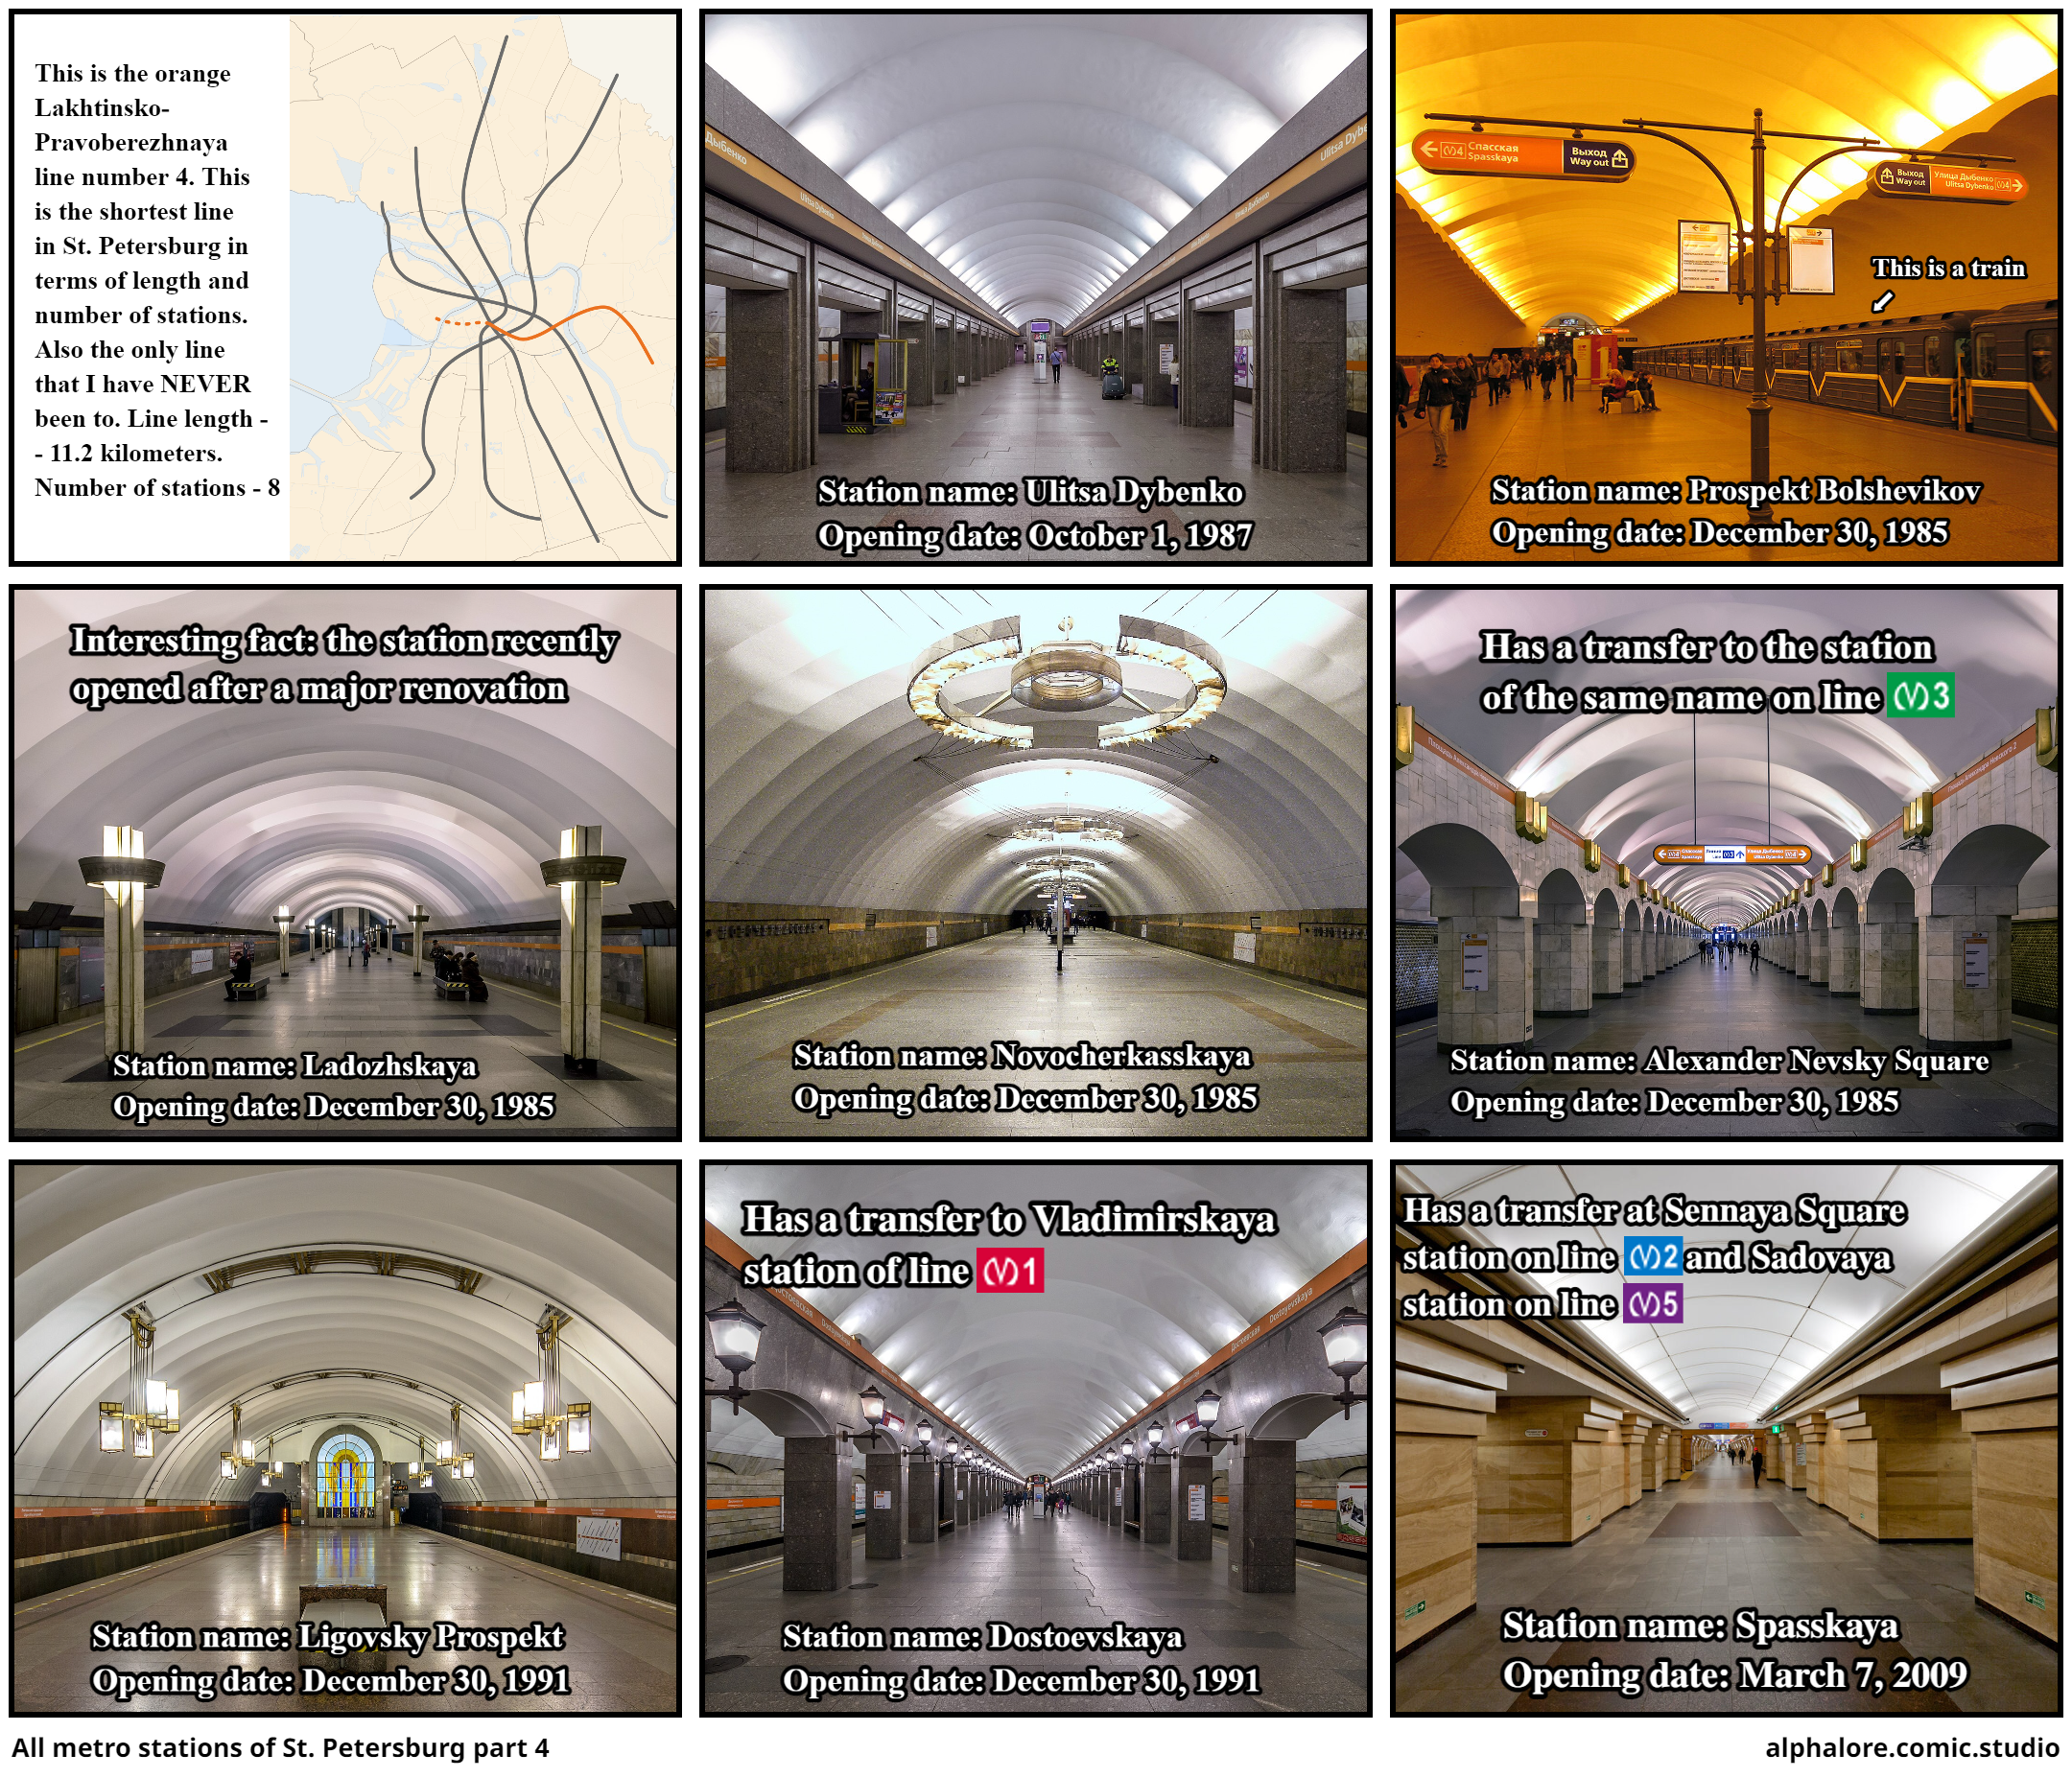 All metro stations of St. Petersburg part 4